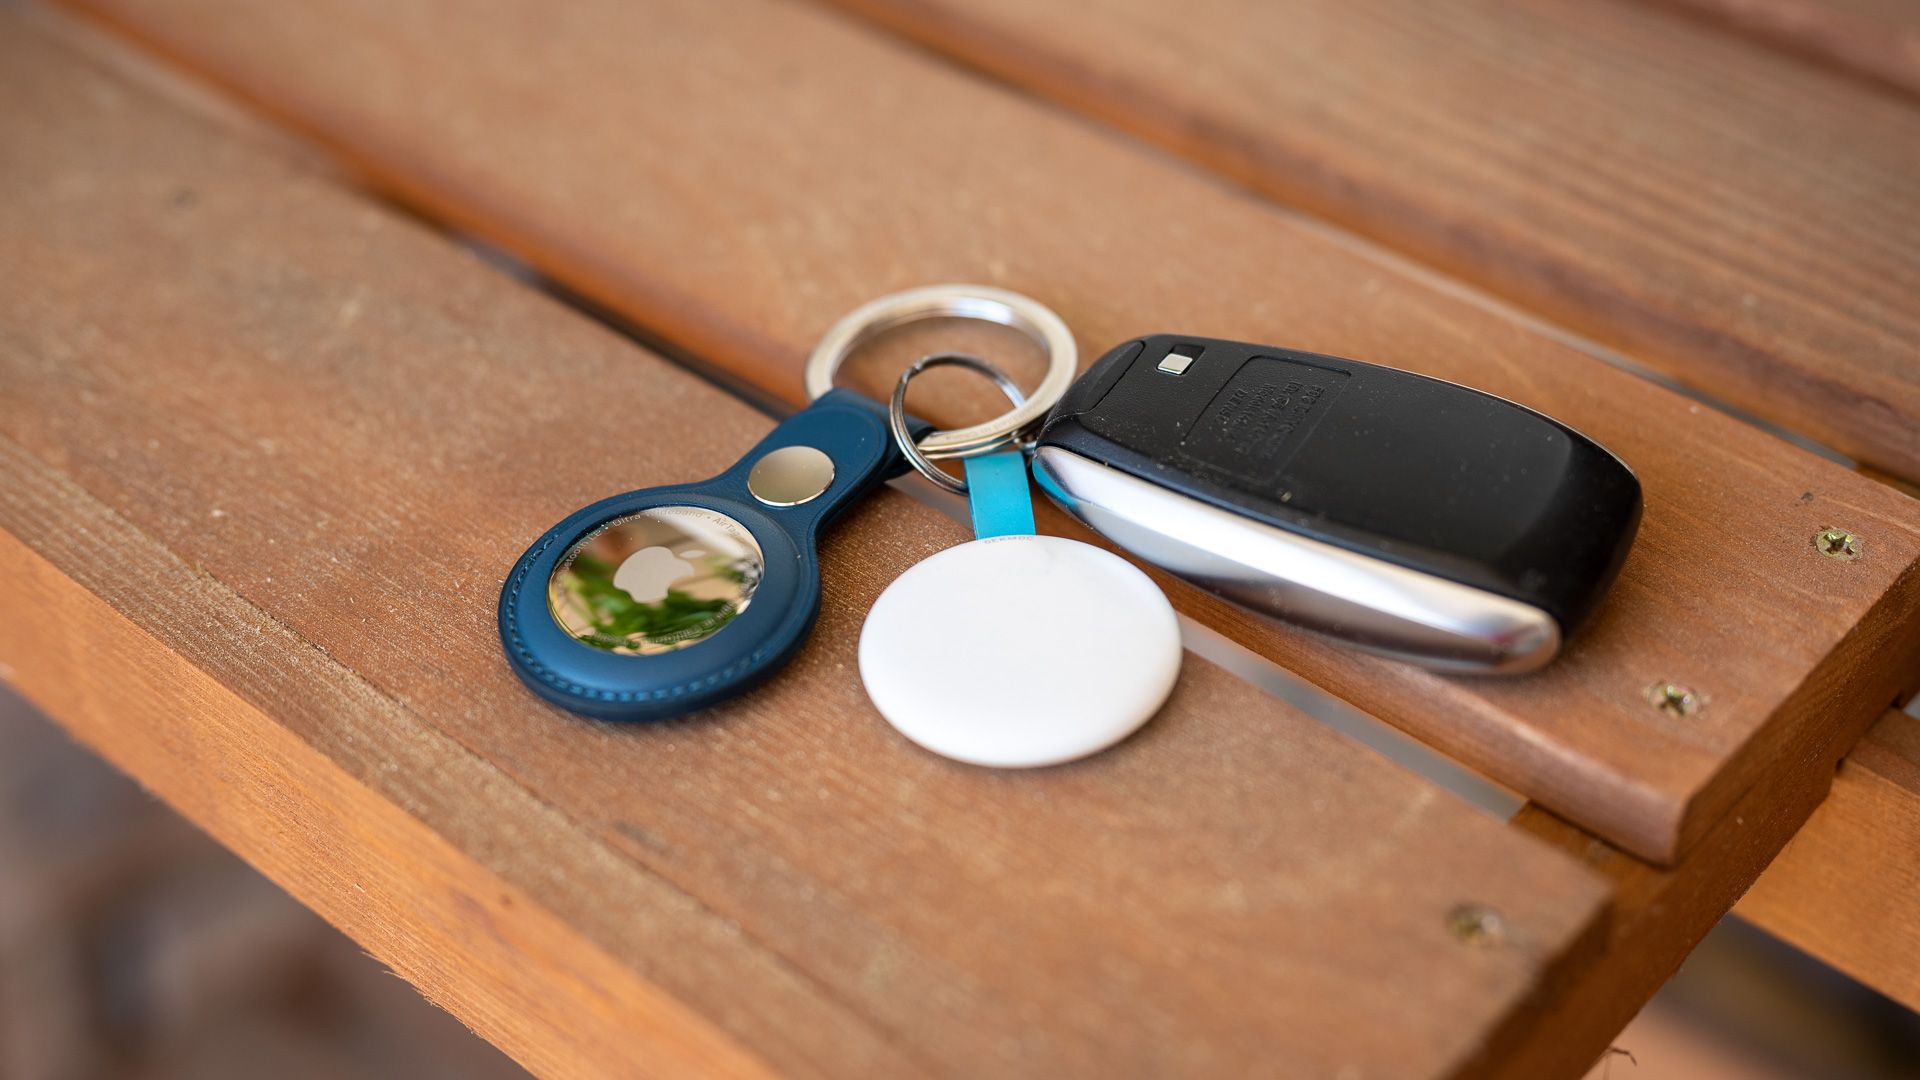 Apple AirTag in a case attached to car keys and sitting on a table